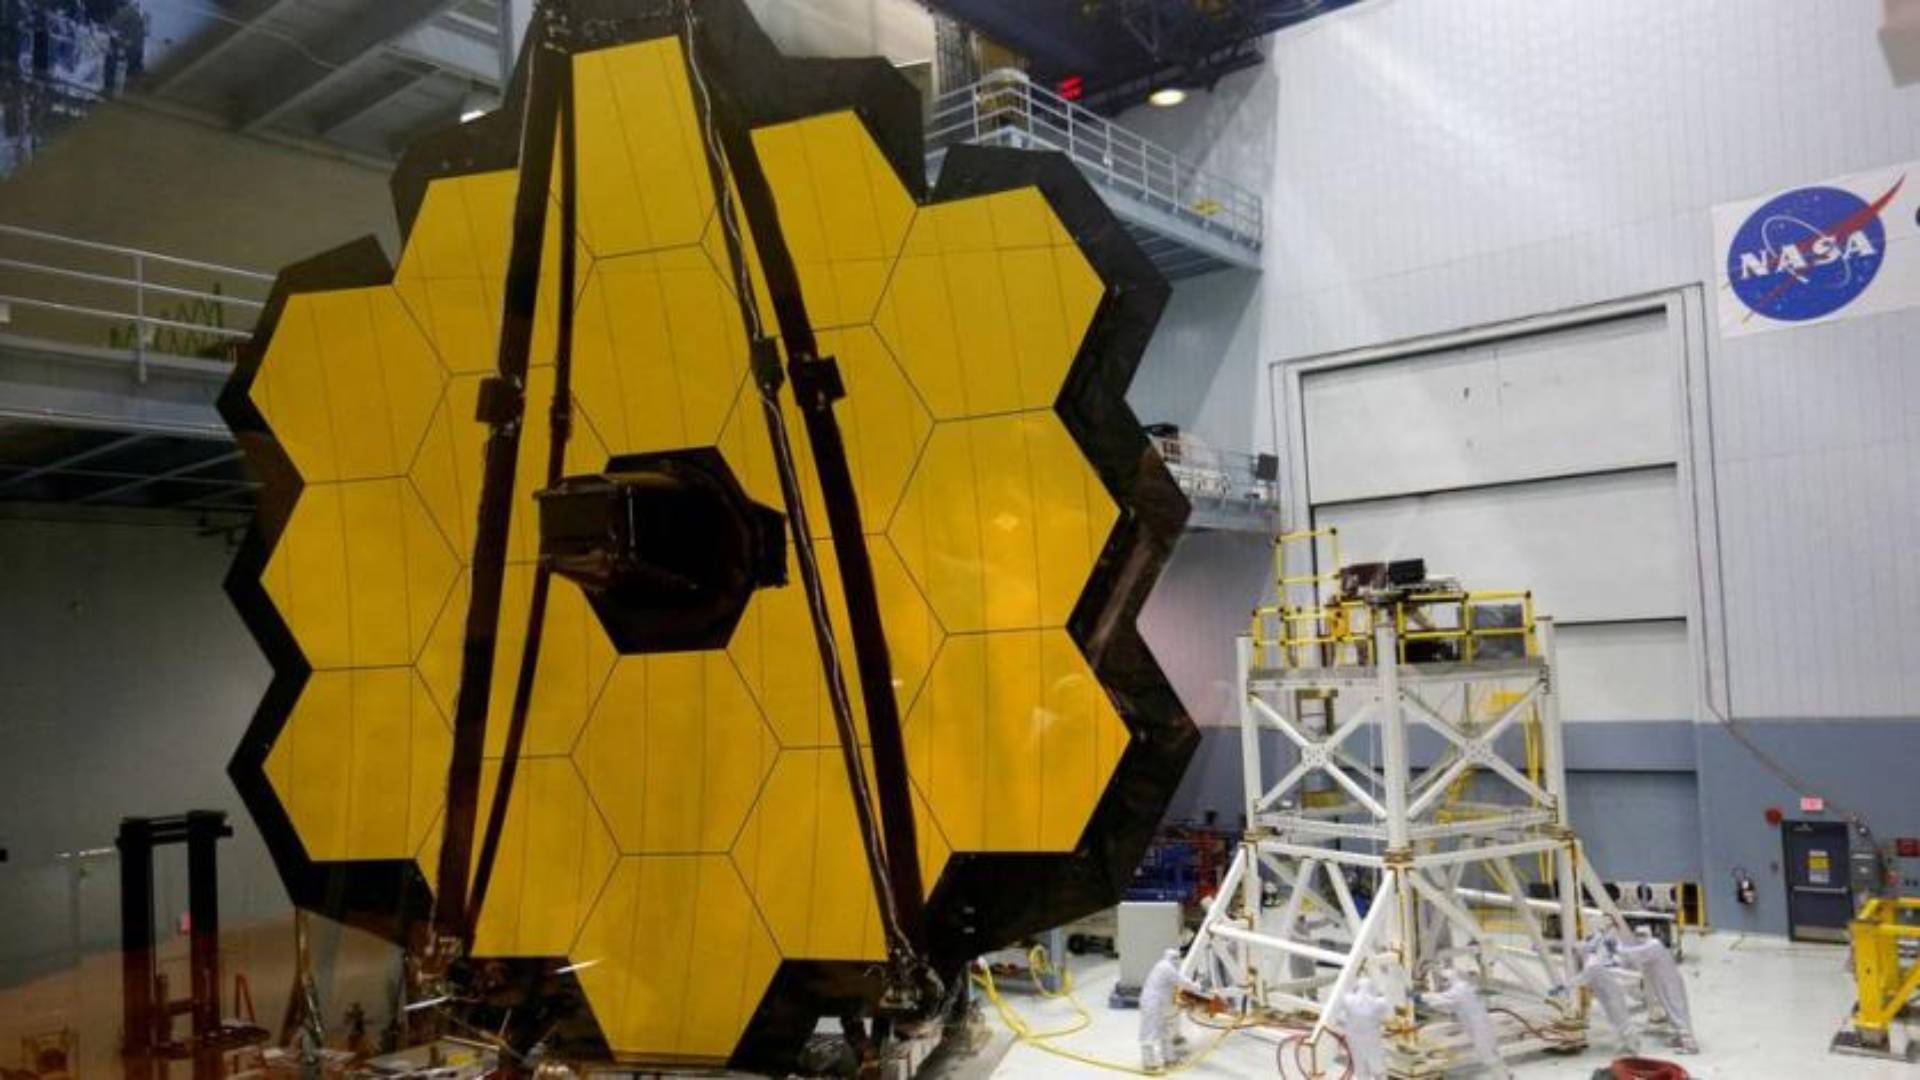  The James Webb Space Telescope Mirror is seen during a media unveiling at NASA’s Goddard Space Flight Center at Greenbelt, Maryland November 2, 2016. (Reuters)